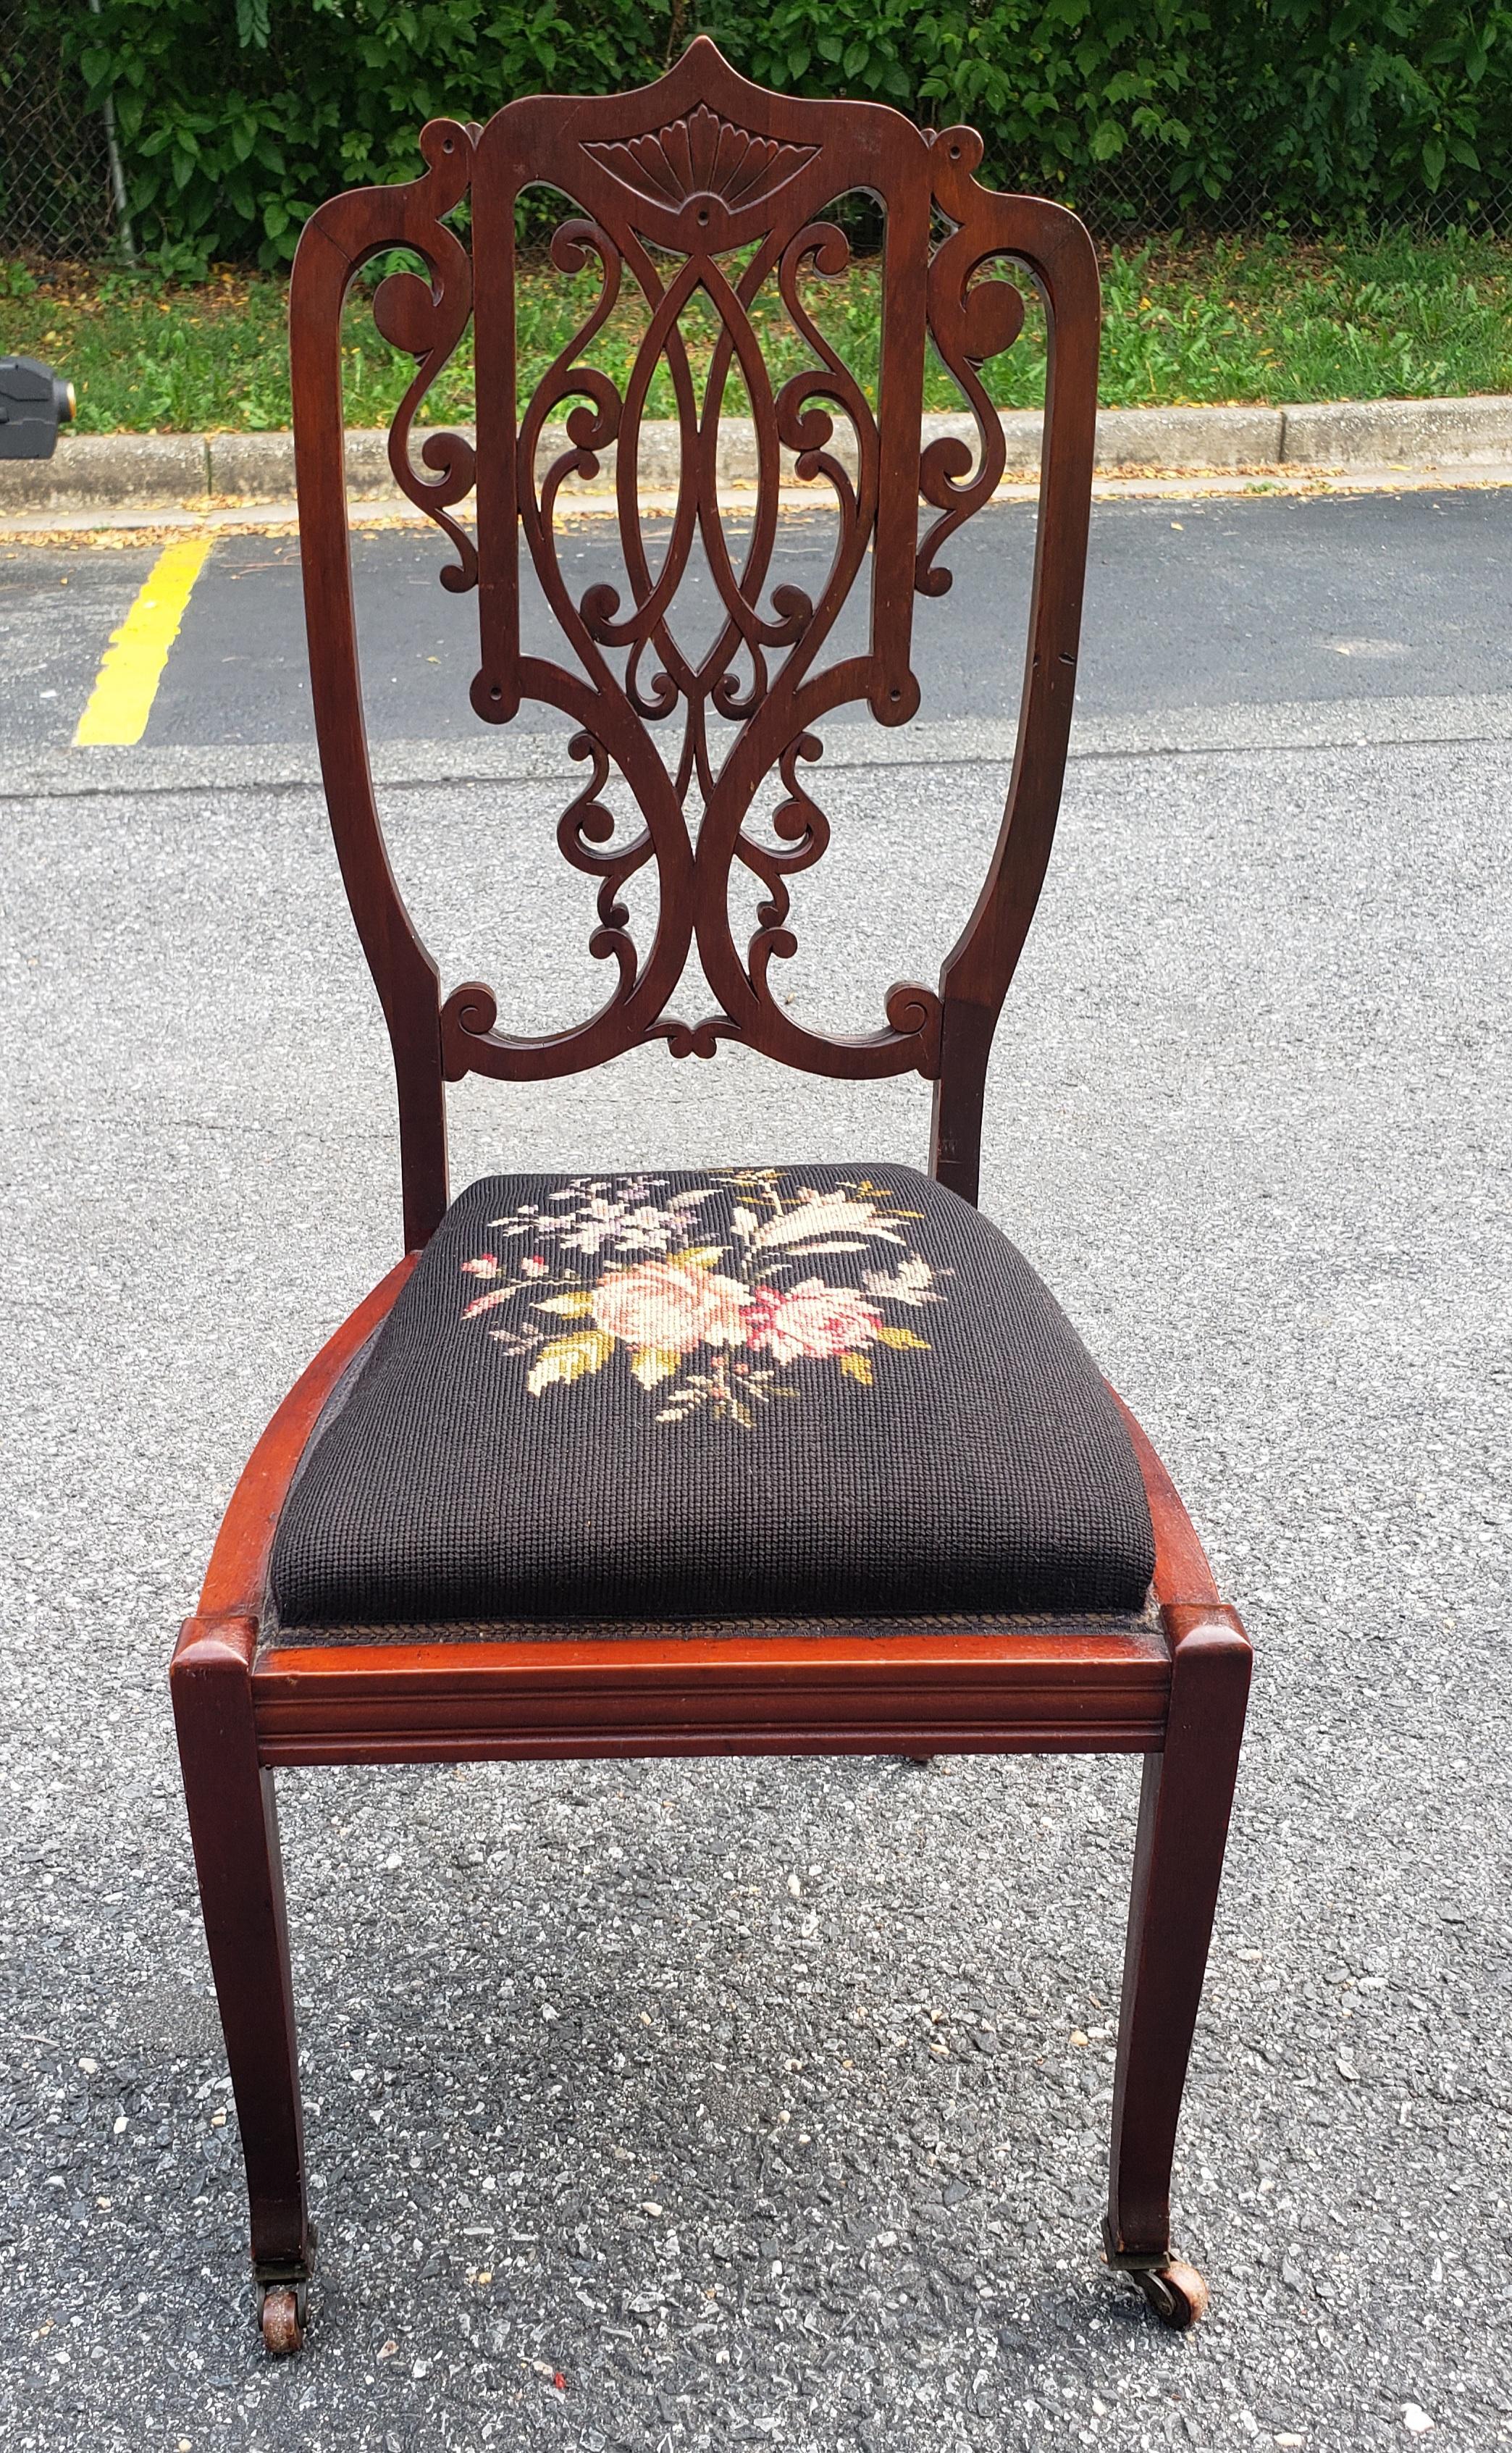 A Late 19th C. Victorian Mahogany and Needlepoint Upholstered Side Chair on Wheels in very good antique condition.